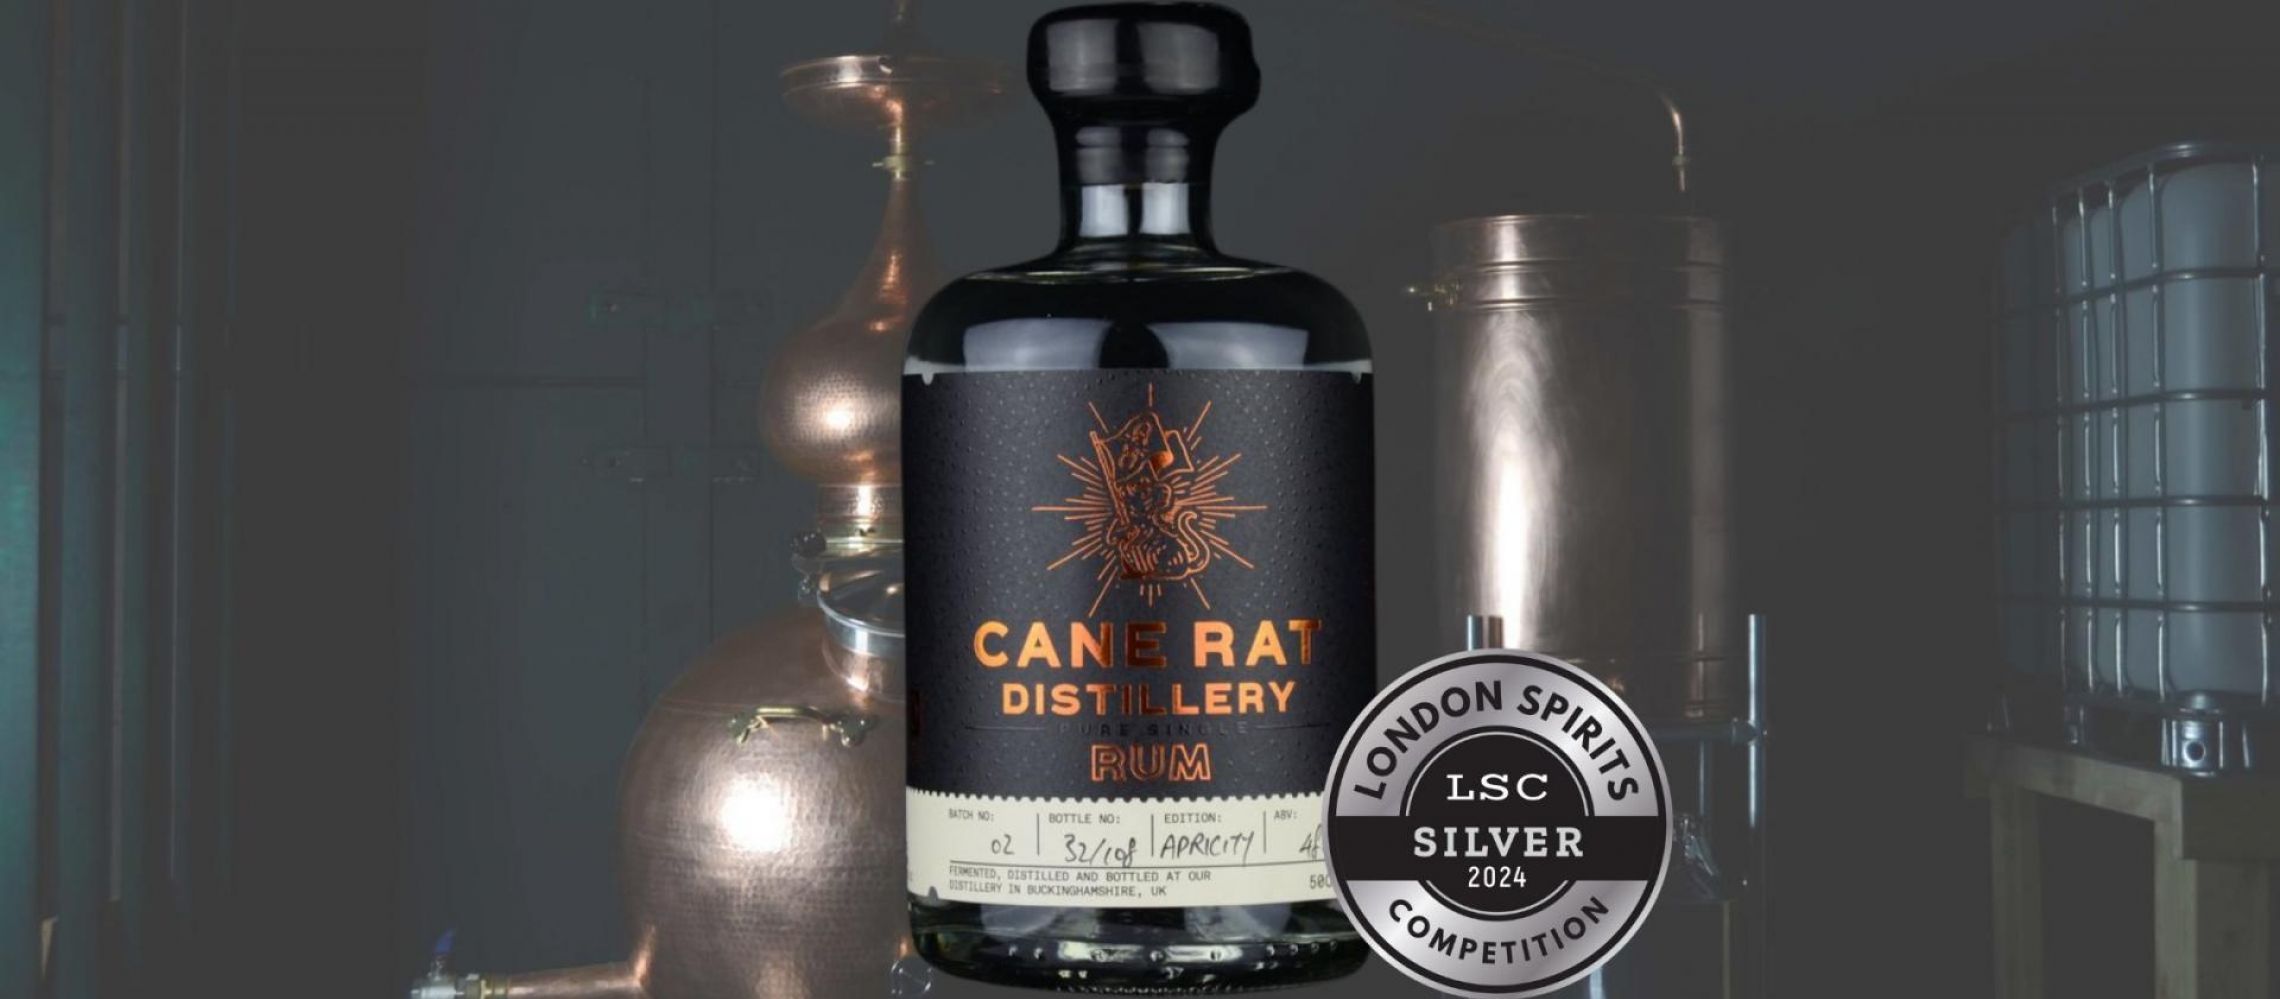 Photo for: The Cane Rat Distillery Wins Silver Medal at the  2024 London Spirits Competition